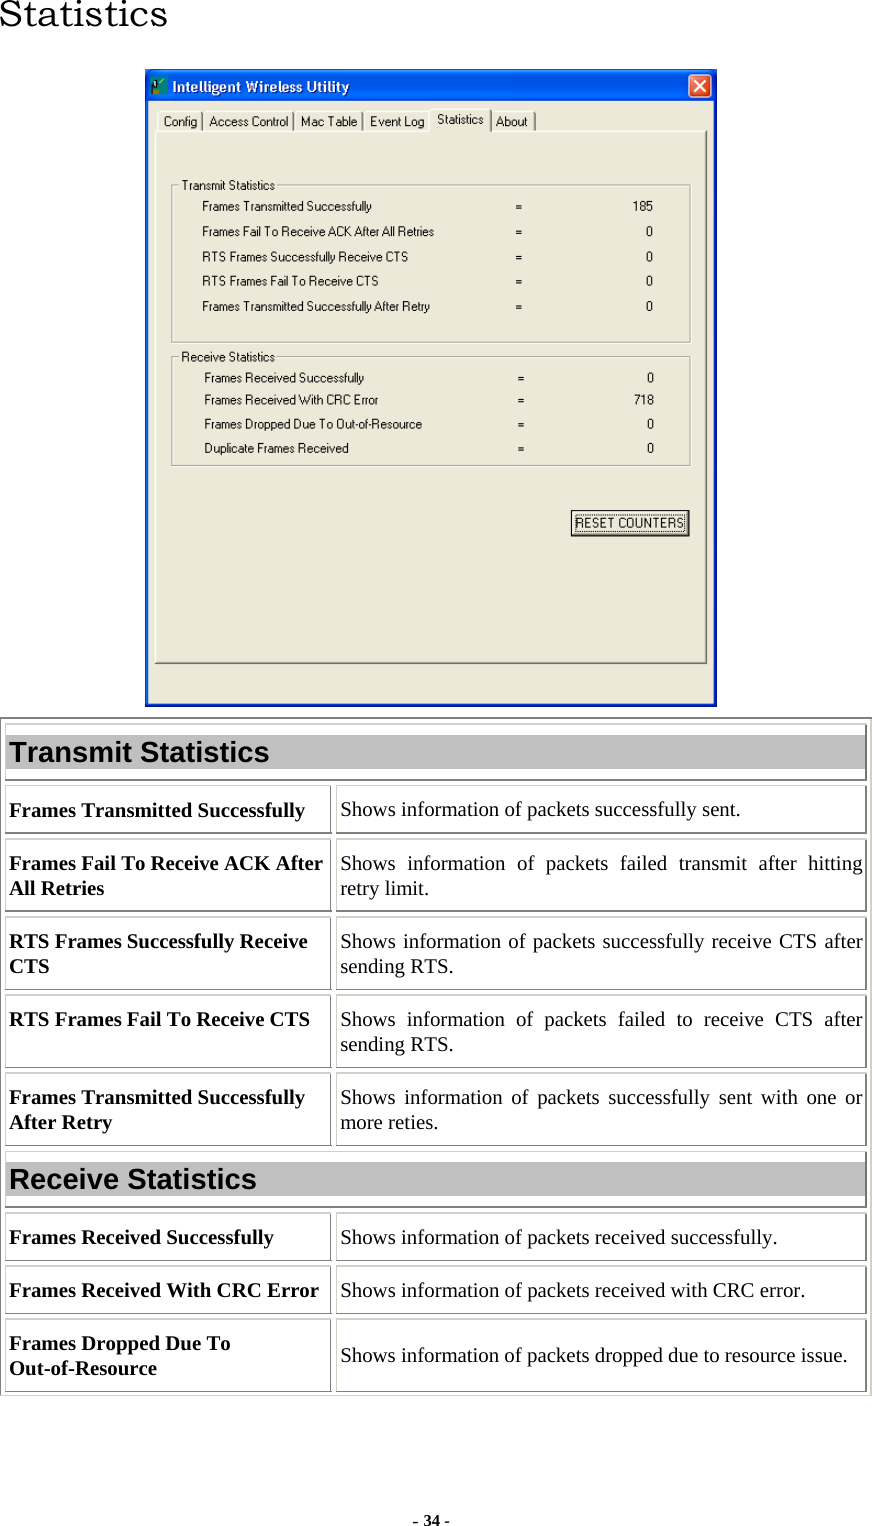  - 34 - Statistics  Transmit Statistics Frames Transmitted Successfully  Shows information of packets successfully sent. Frames Fail To Receive ACK After All Retries  Shows information of packets failed transmit after hitting retry limit. RTS Frames Successfully Receive CTS  Shows information of packets successfully receive CTS after sending RTS. RTS Frames Fail To Receive CTS  Shows information of packets failed to receive CTS after sending RTS. Frames Transmitted Successfully After Retry  Shows information of packets successfully sent with one or more reties. Receive Statistics Frames Received Successfully  Shows information of packets received successfully. Frames Received With CRC Error  Shows information of packets received with CRC error. Frames Dropped Due To Out-of-Resource  Shows information of packets dropped due to resource issue. 